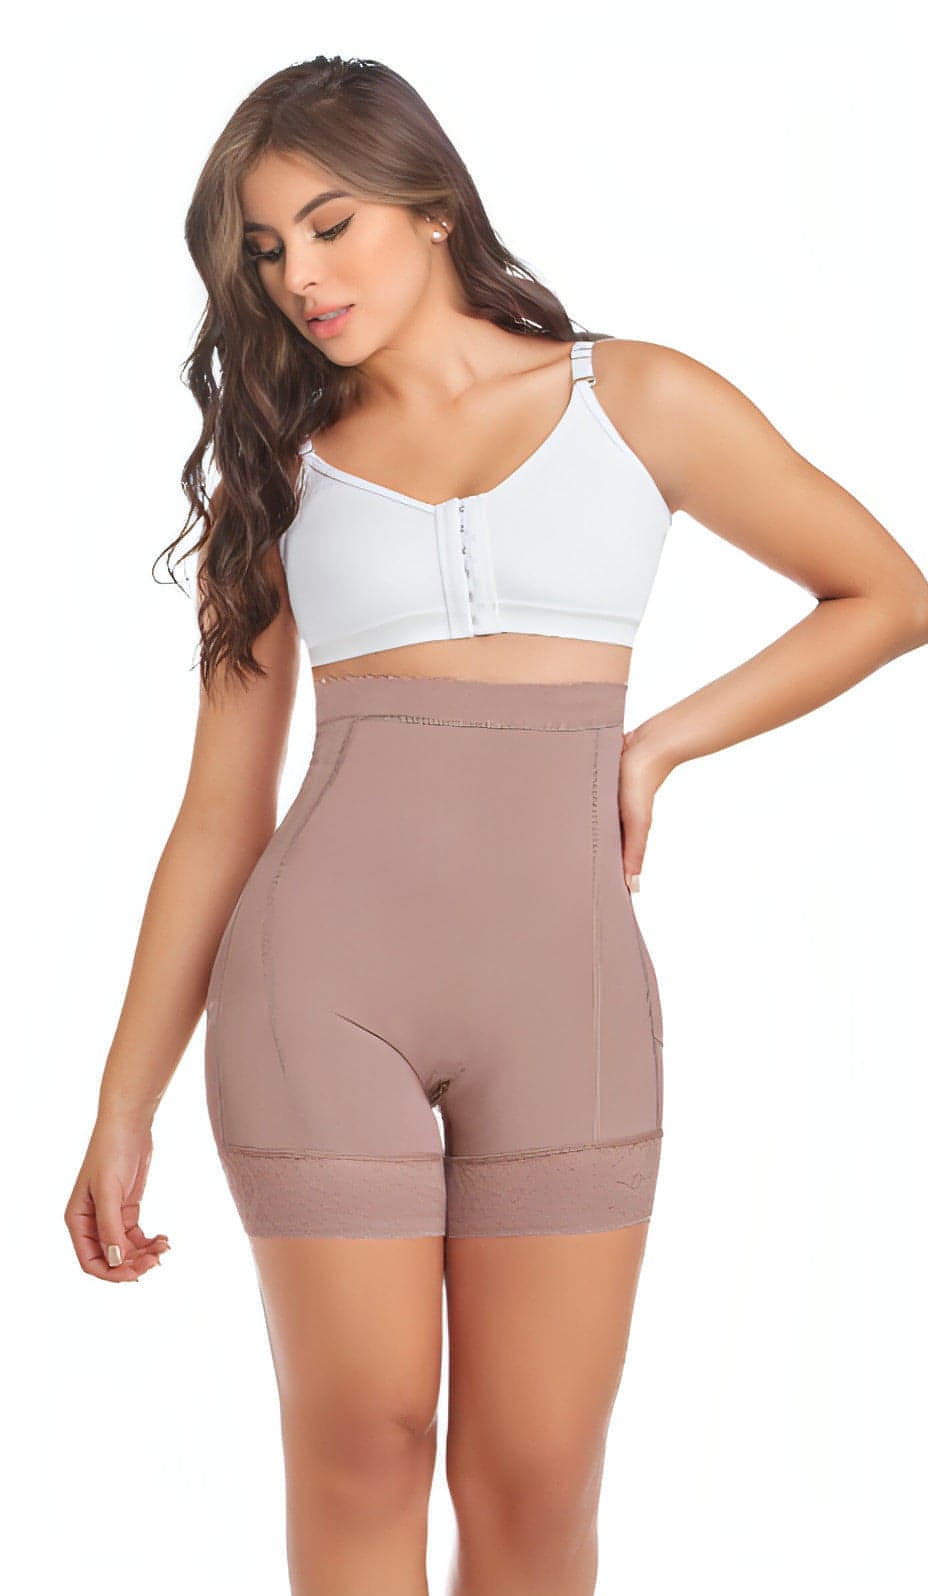 Ily Clothing High Compression Short